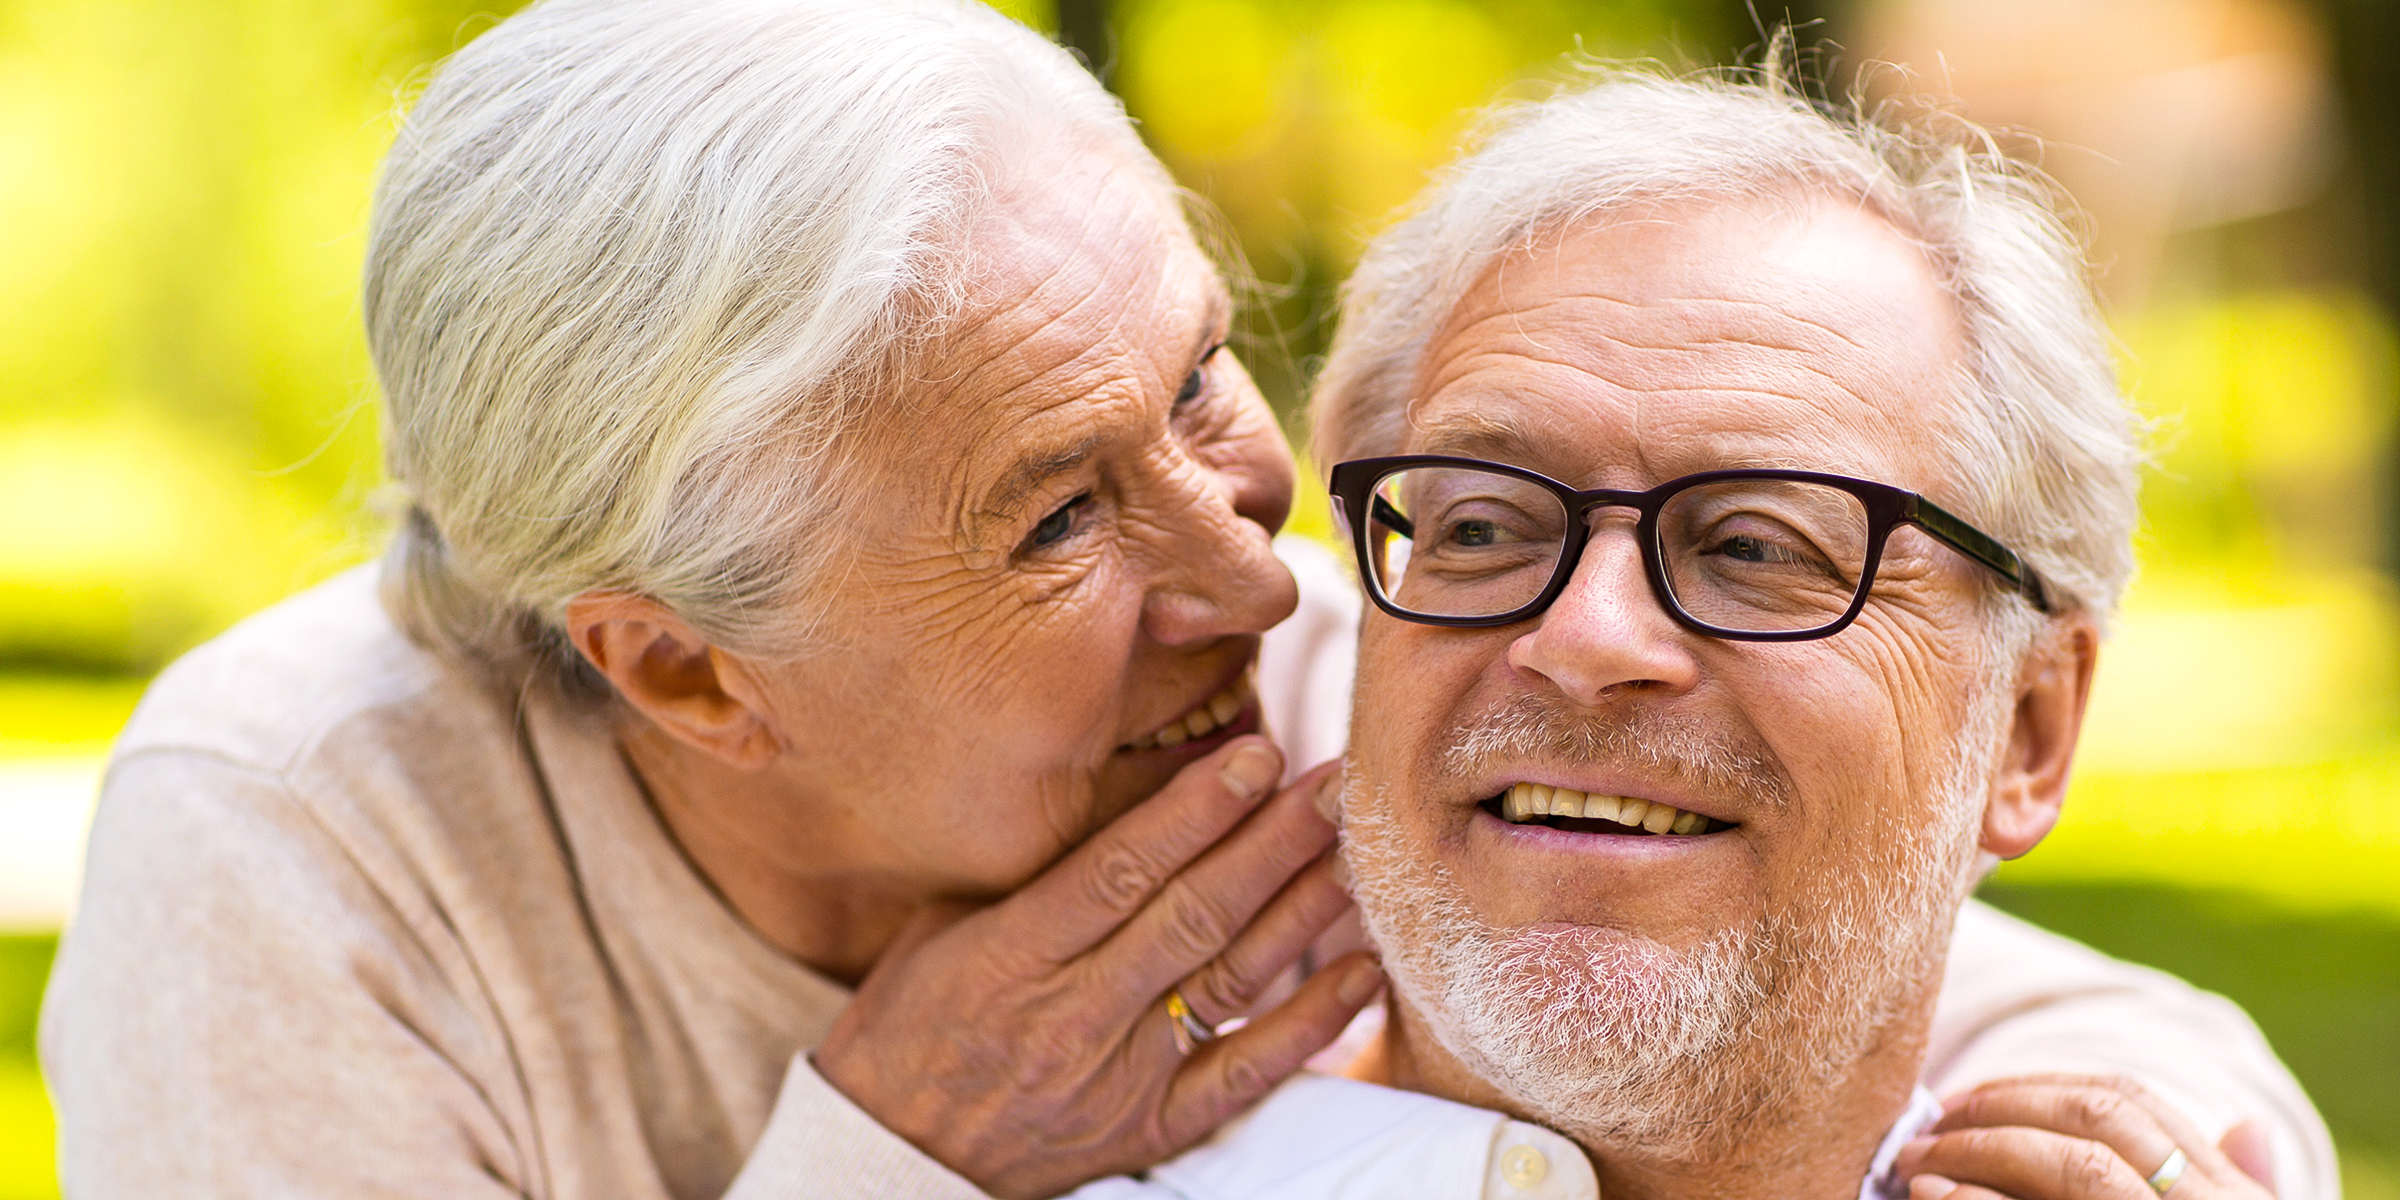 An elderly woman whispering to her husband | Source: Shutterstock